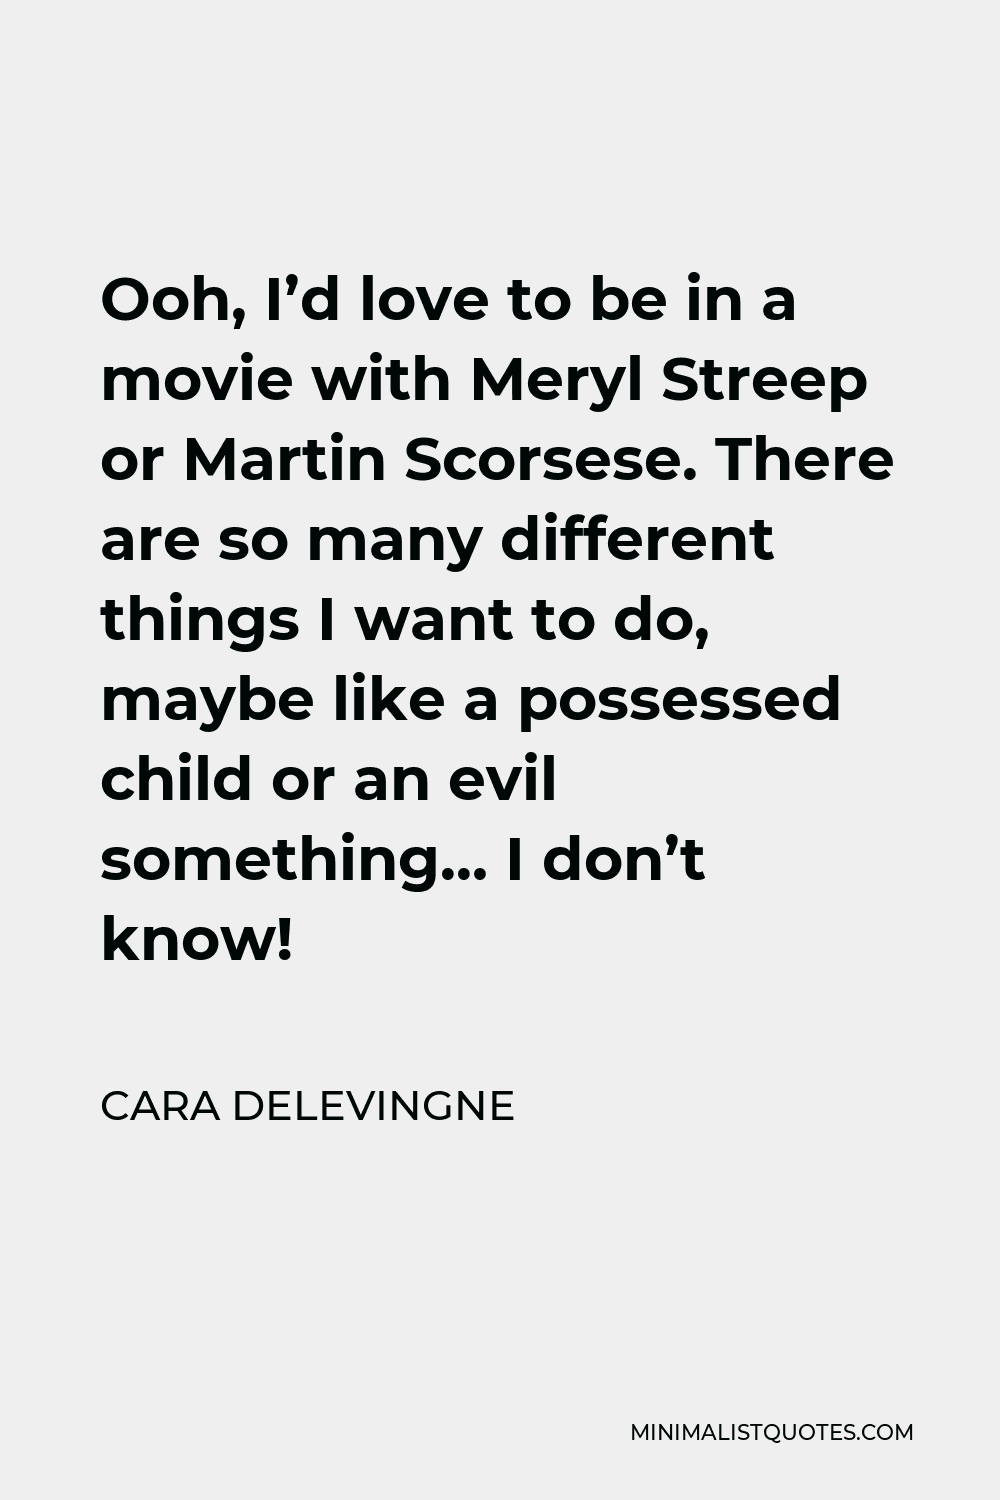 Cara Delevingne Quote - Ooh, I’d love to be in a movie with Meryl Streep or Martin Scorsese. There are so many different things I want to do, maybe like a possessed child or an evil something… I don’t know!